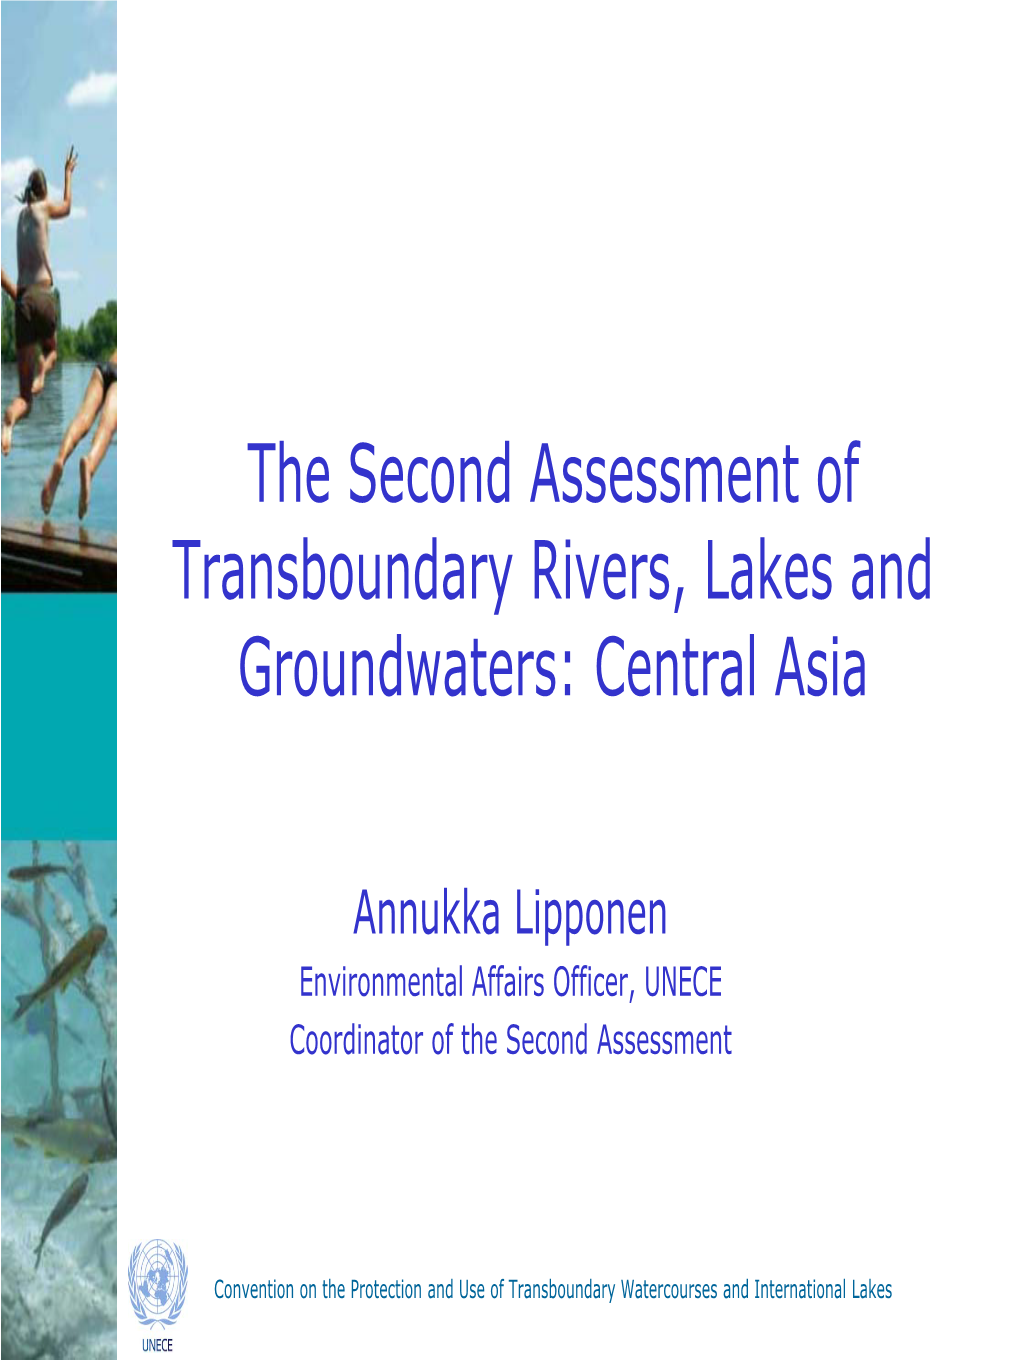 The Second Assessment of Transboundary Rivers, Lakes and Groundwaters: Central Asia